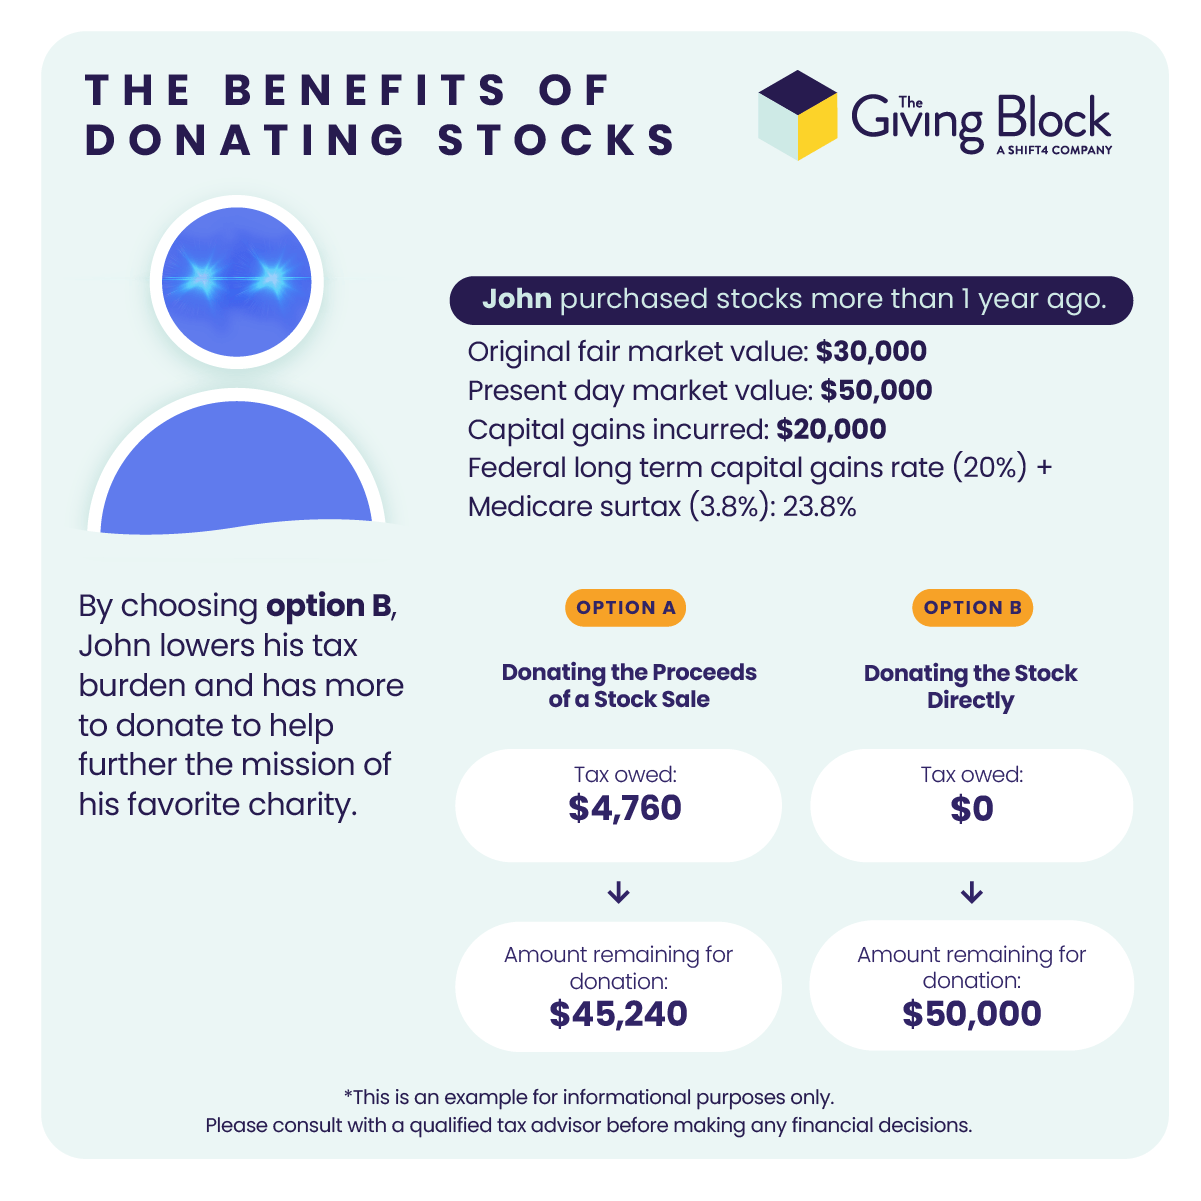 Tax Benefits - The Benefits of Donating Stocks | The Giving Block